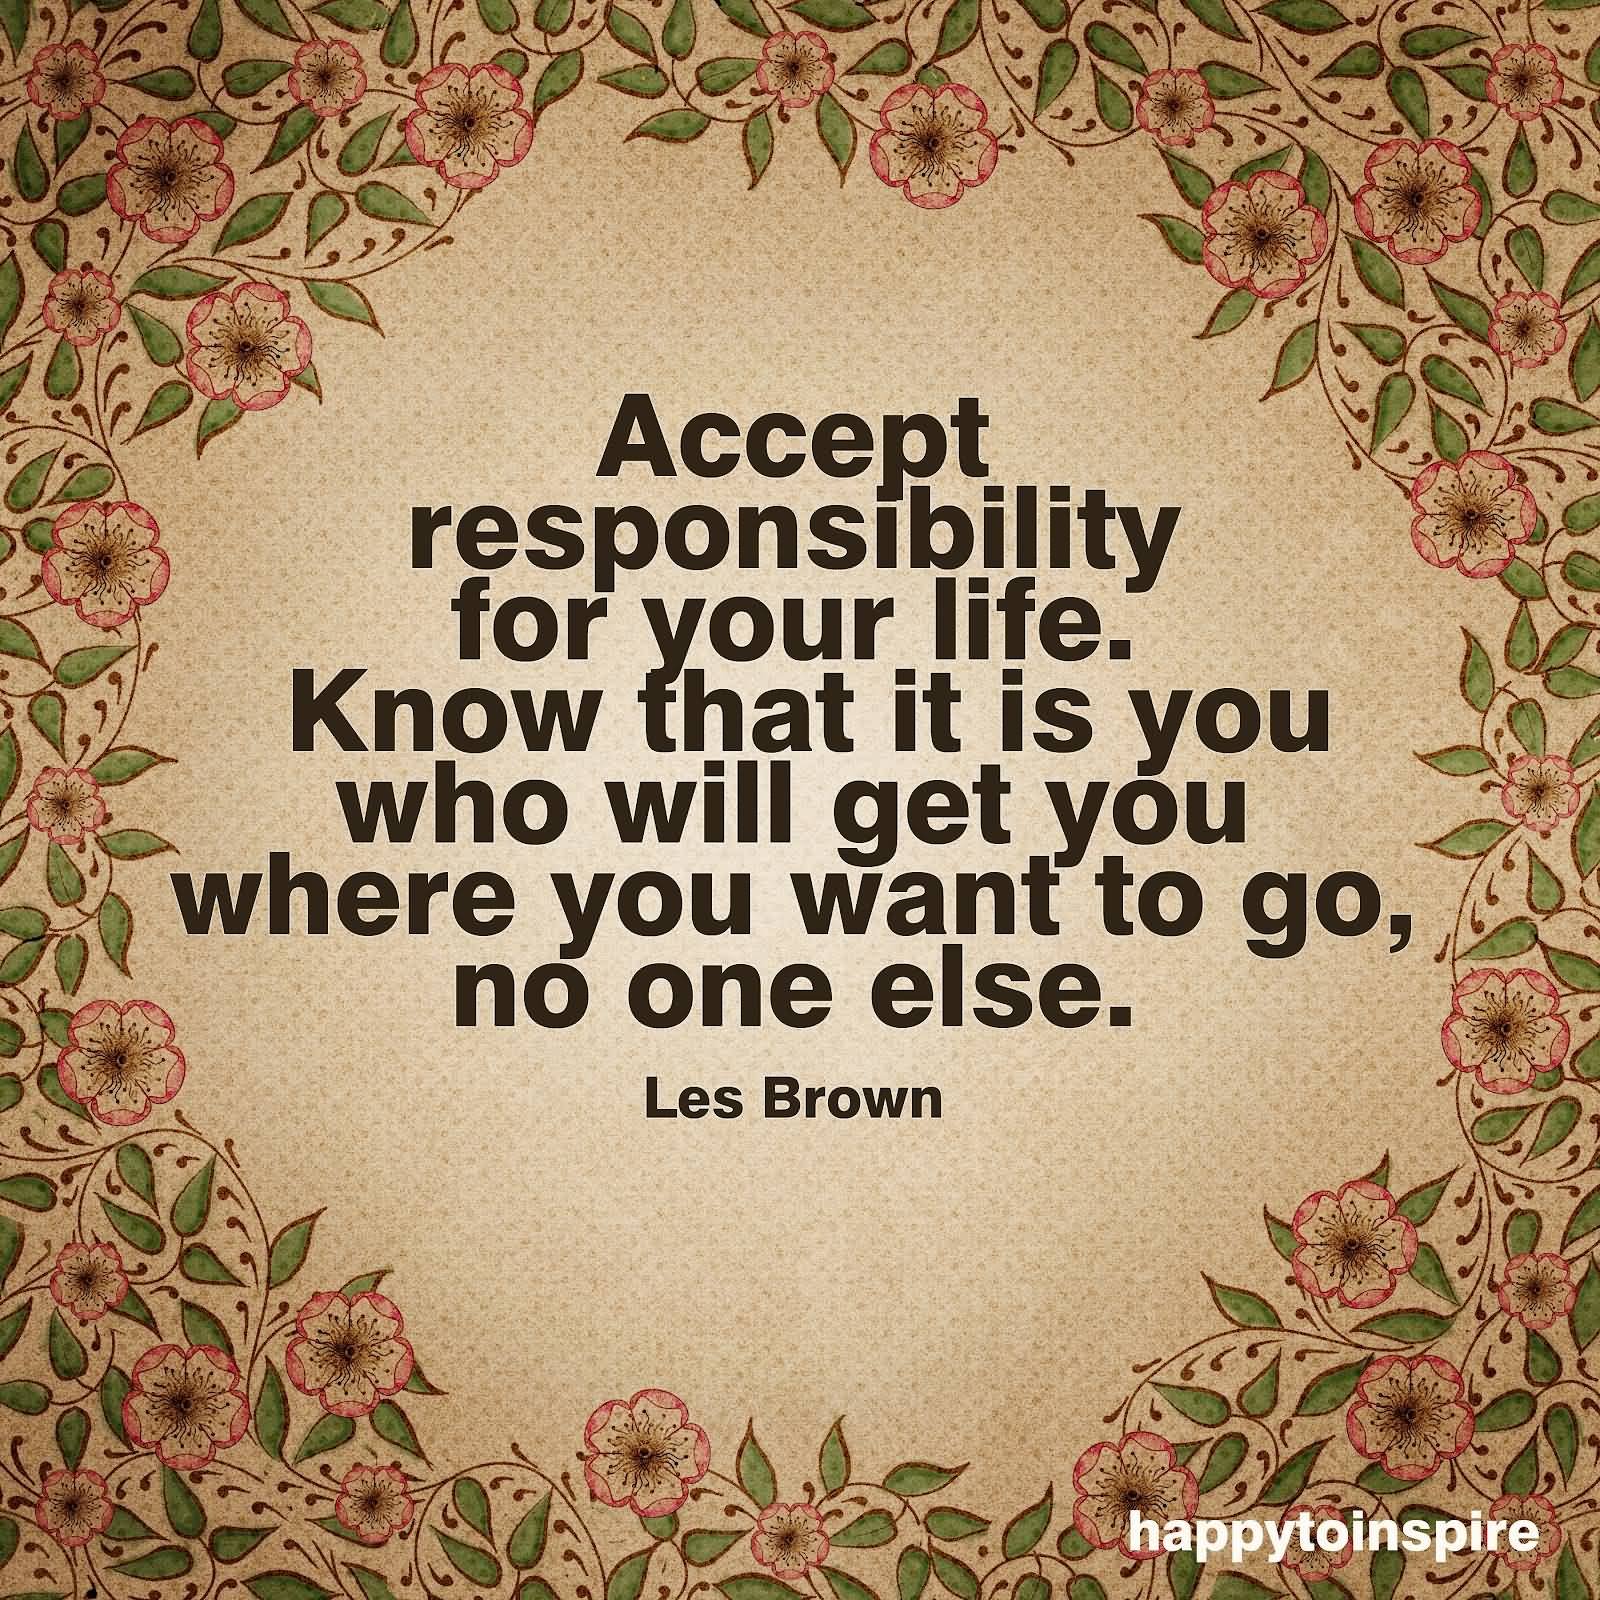 Accept responsibility for your life. Know that it is you who will get you where you want to go, no one else  - Les Brown